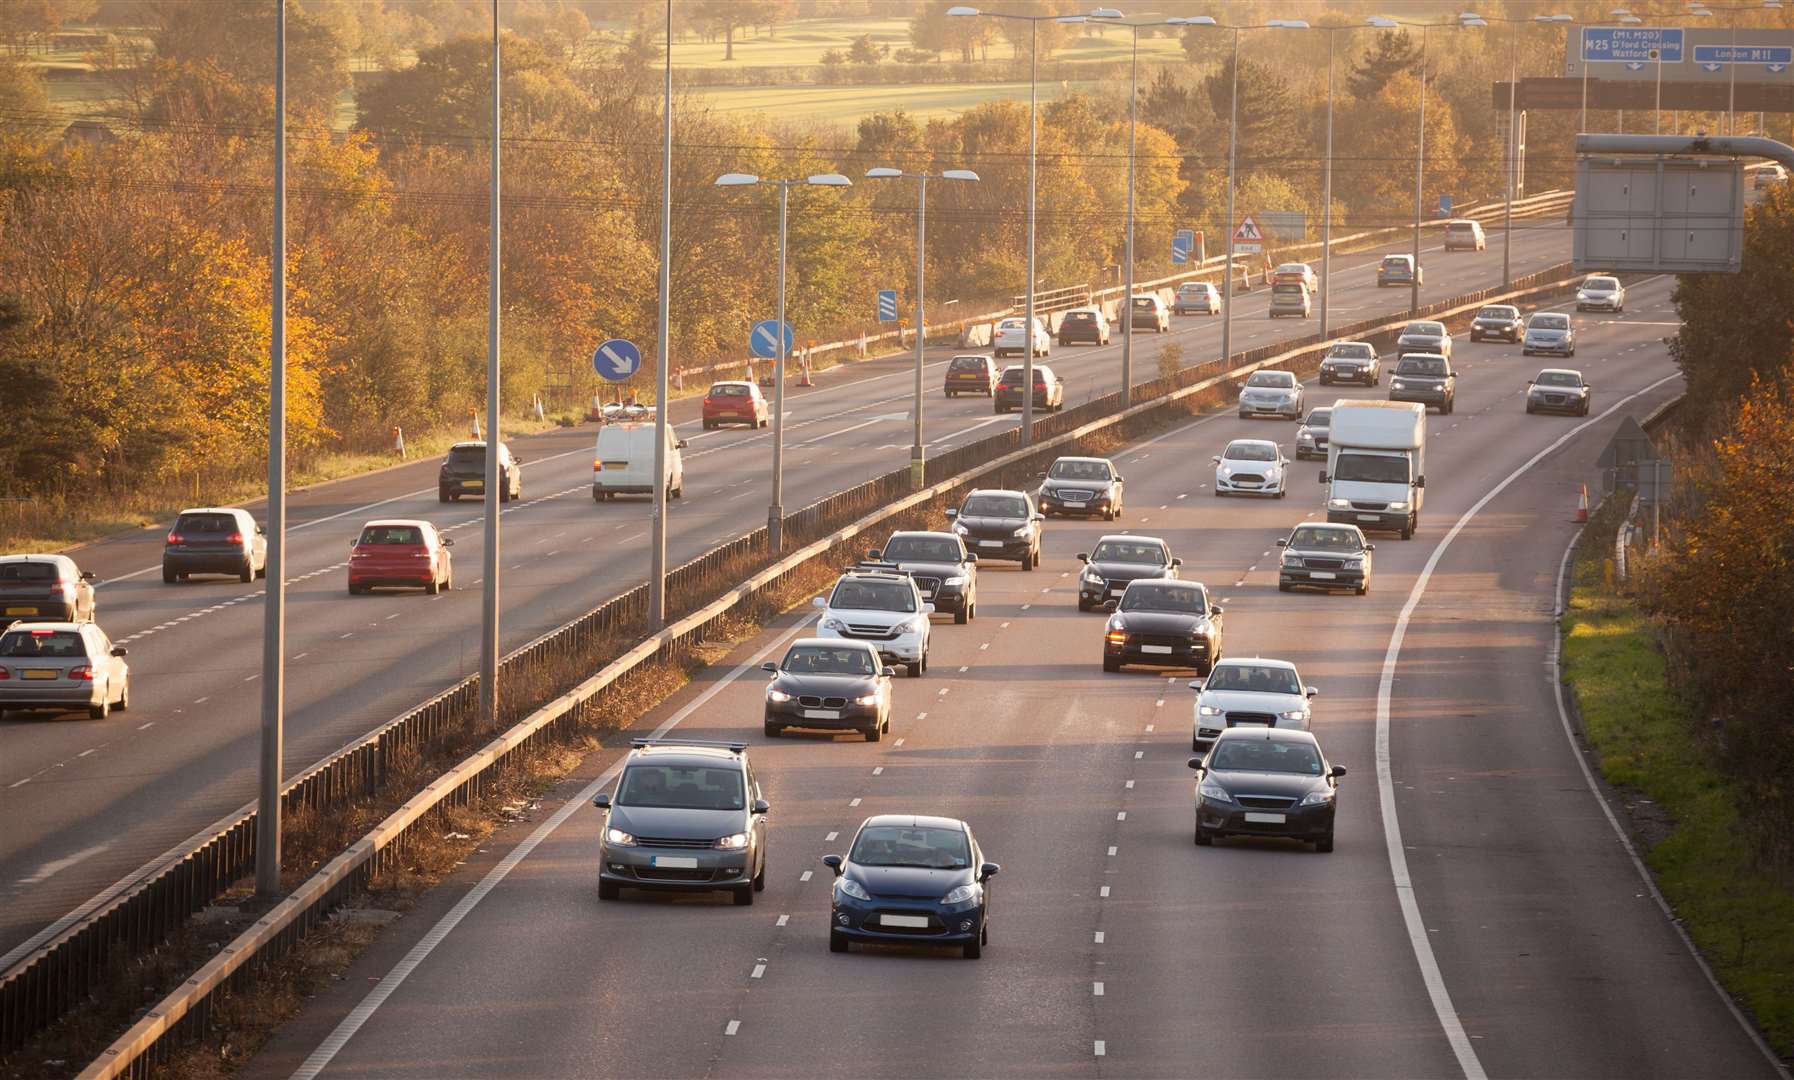 The AA says it expects millions more drivers on the roads this weekend. Image: Stock photo.